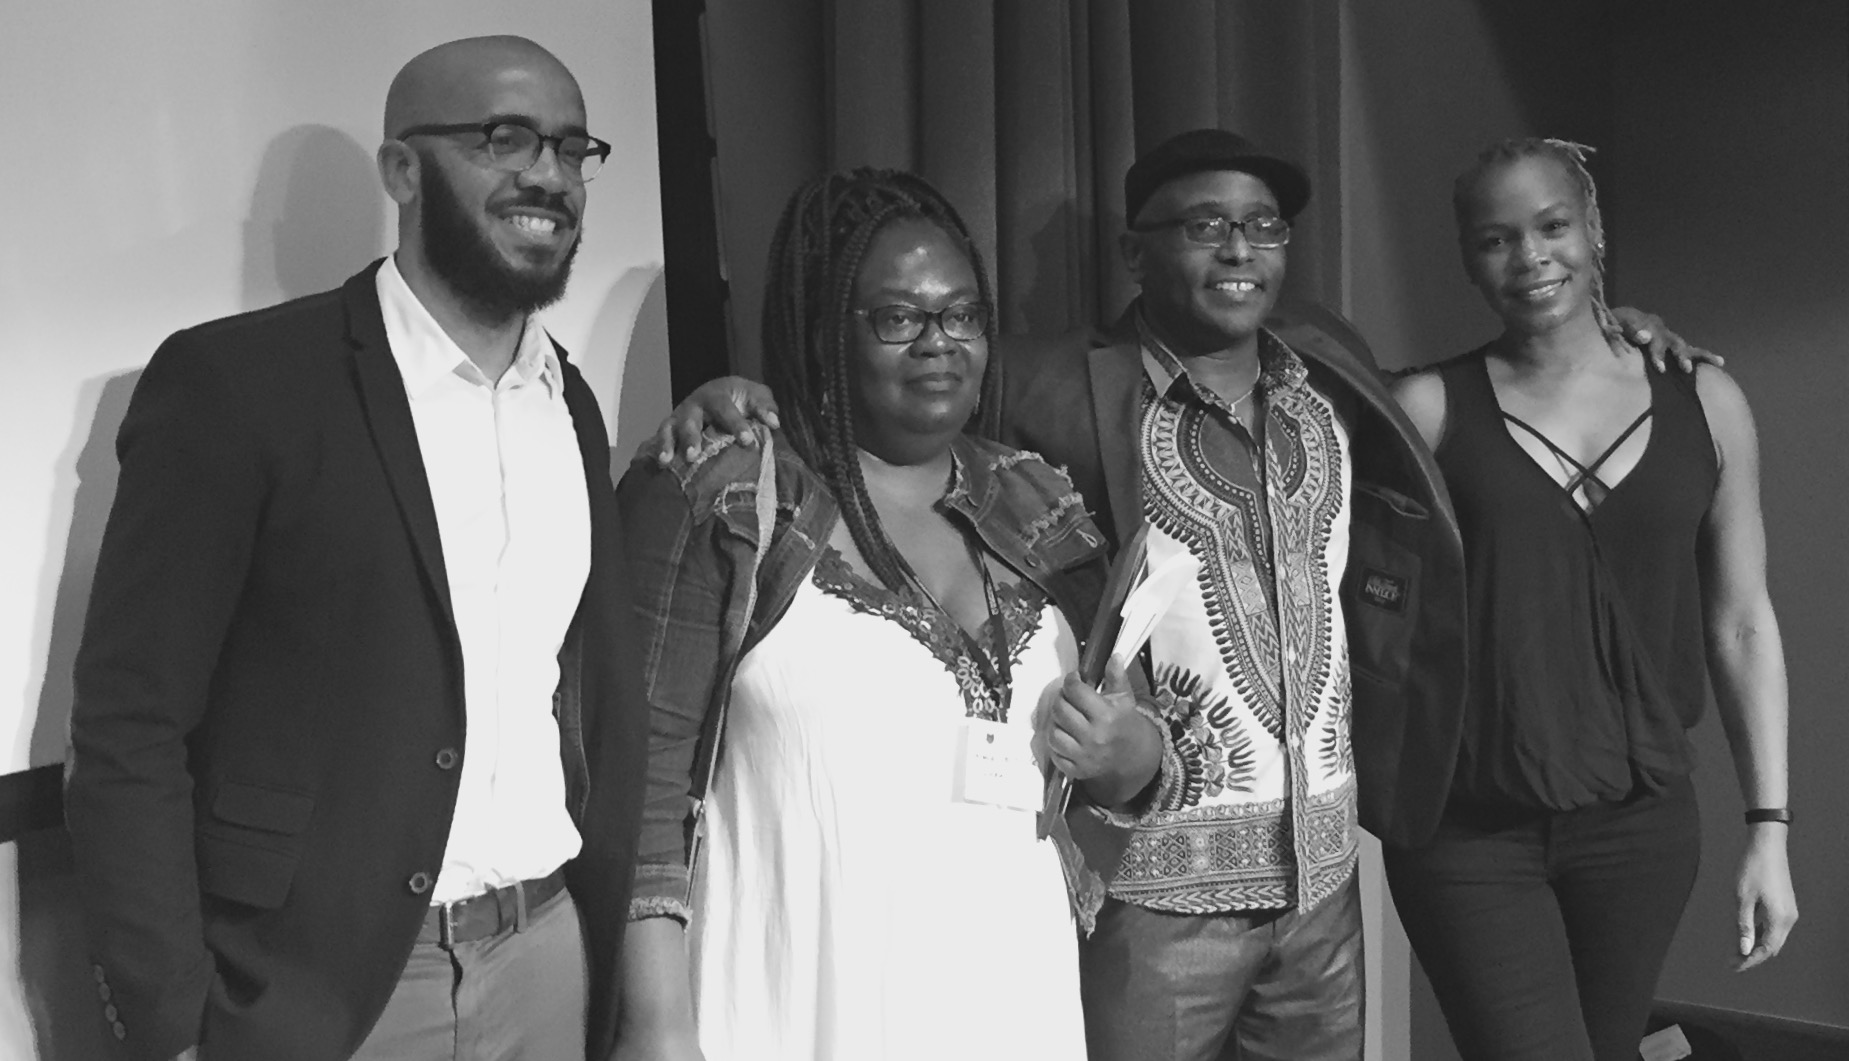  Ferrell with the other BCALA Poetry Awardees—Clint Smith, Jaqueline Nicole Harris, and Tyehimba Jess. 